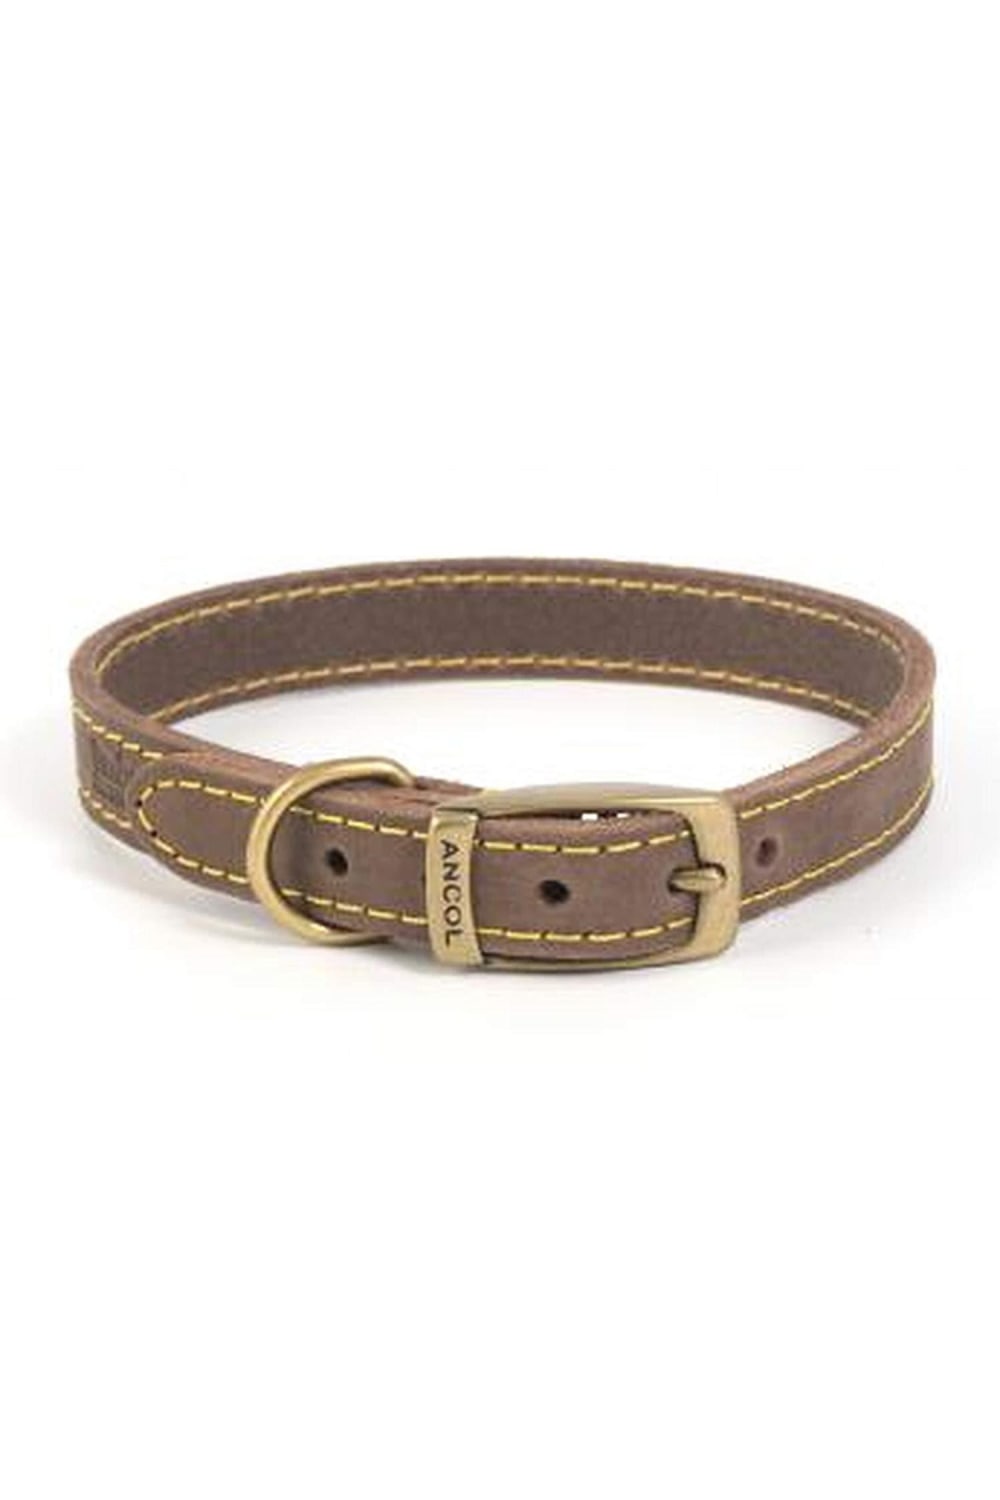 Ancol Timberwolf Leather Dog Collar (Sable) (14.2-18.1in)